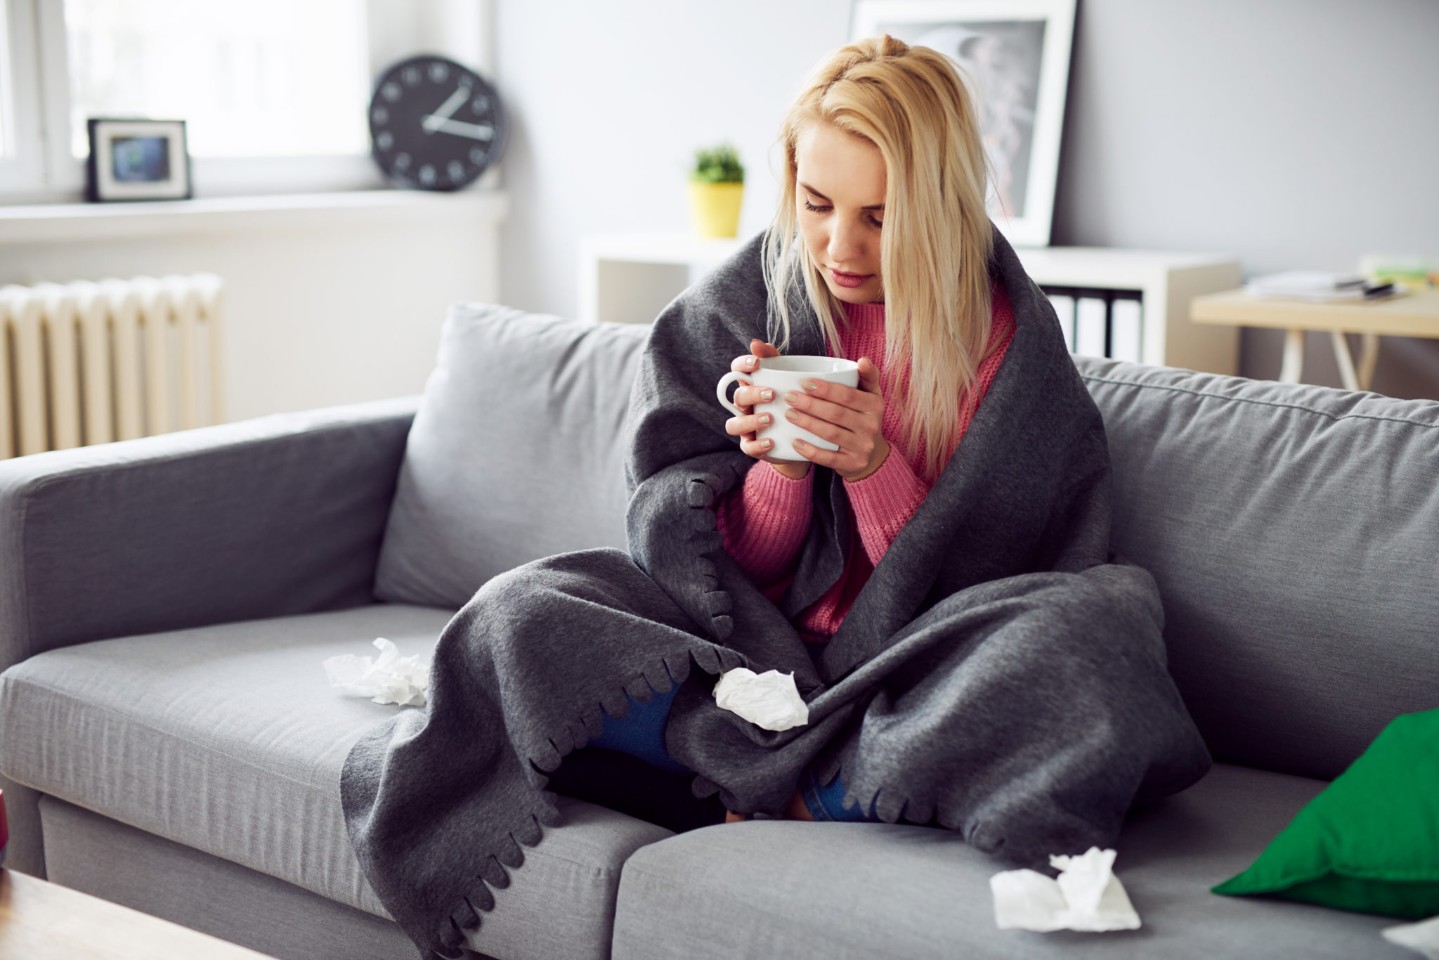 Young woman drinking tea while covered in blanket||thumb-side||thumb-up||thumb-down